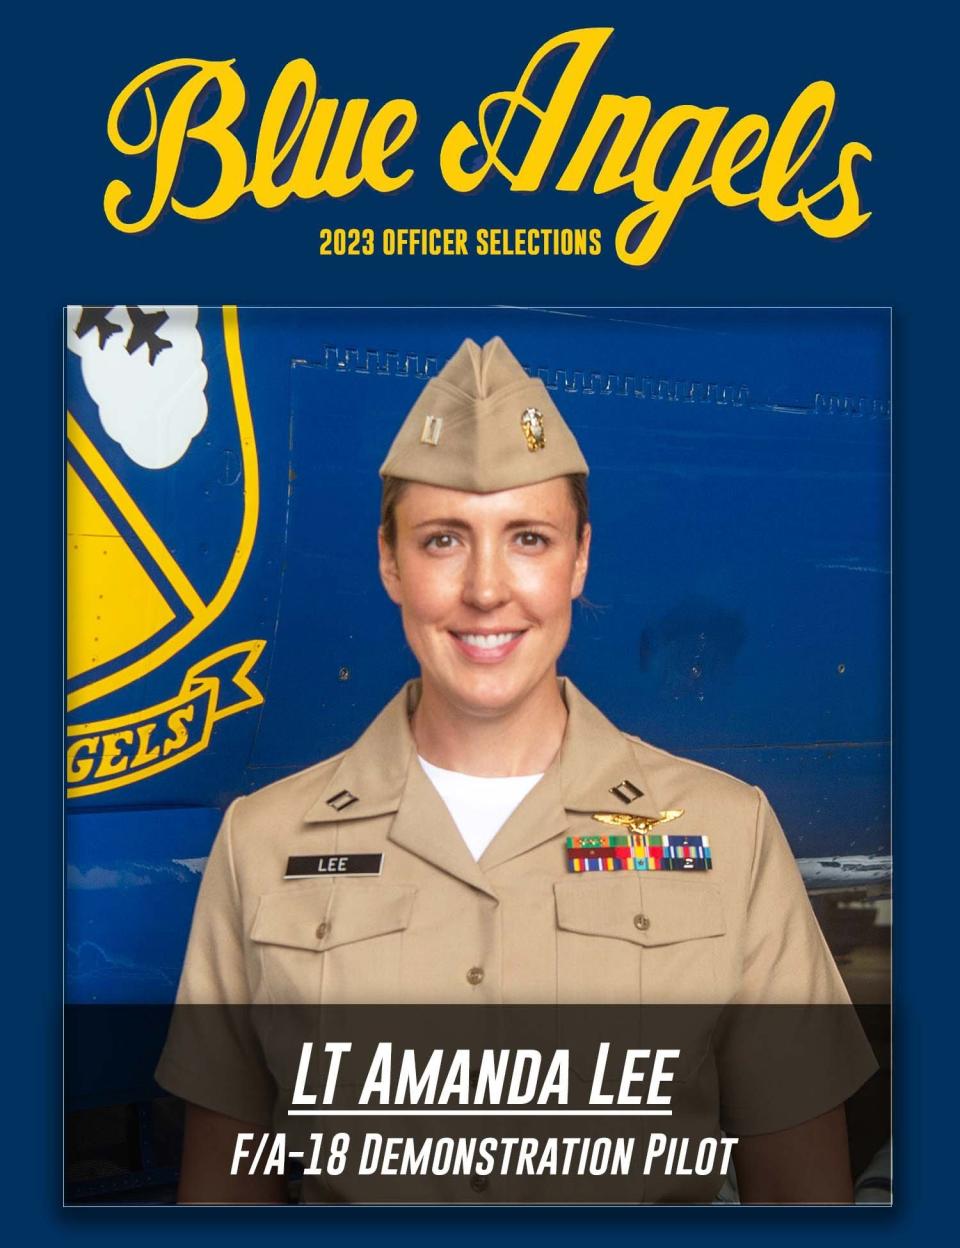 Lt. Amanda Lee, of Mounds View, Minn., has been named the Blue Angels' first woman F/A-18E/F pilot in the team's history. She is currently assigned to the "Gladiators" of Strike Fighter Squadron 106.